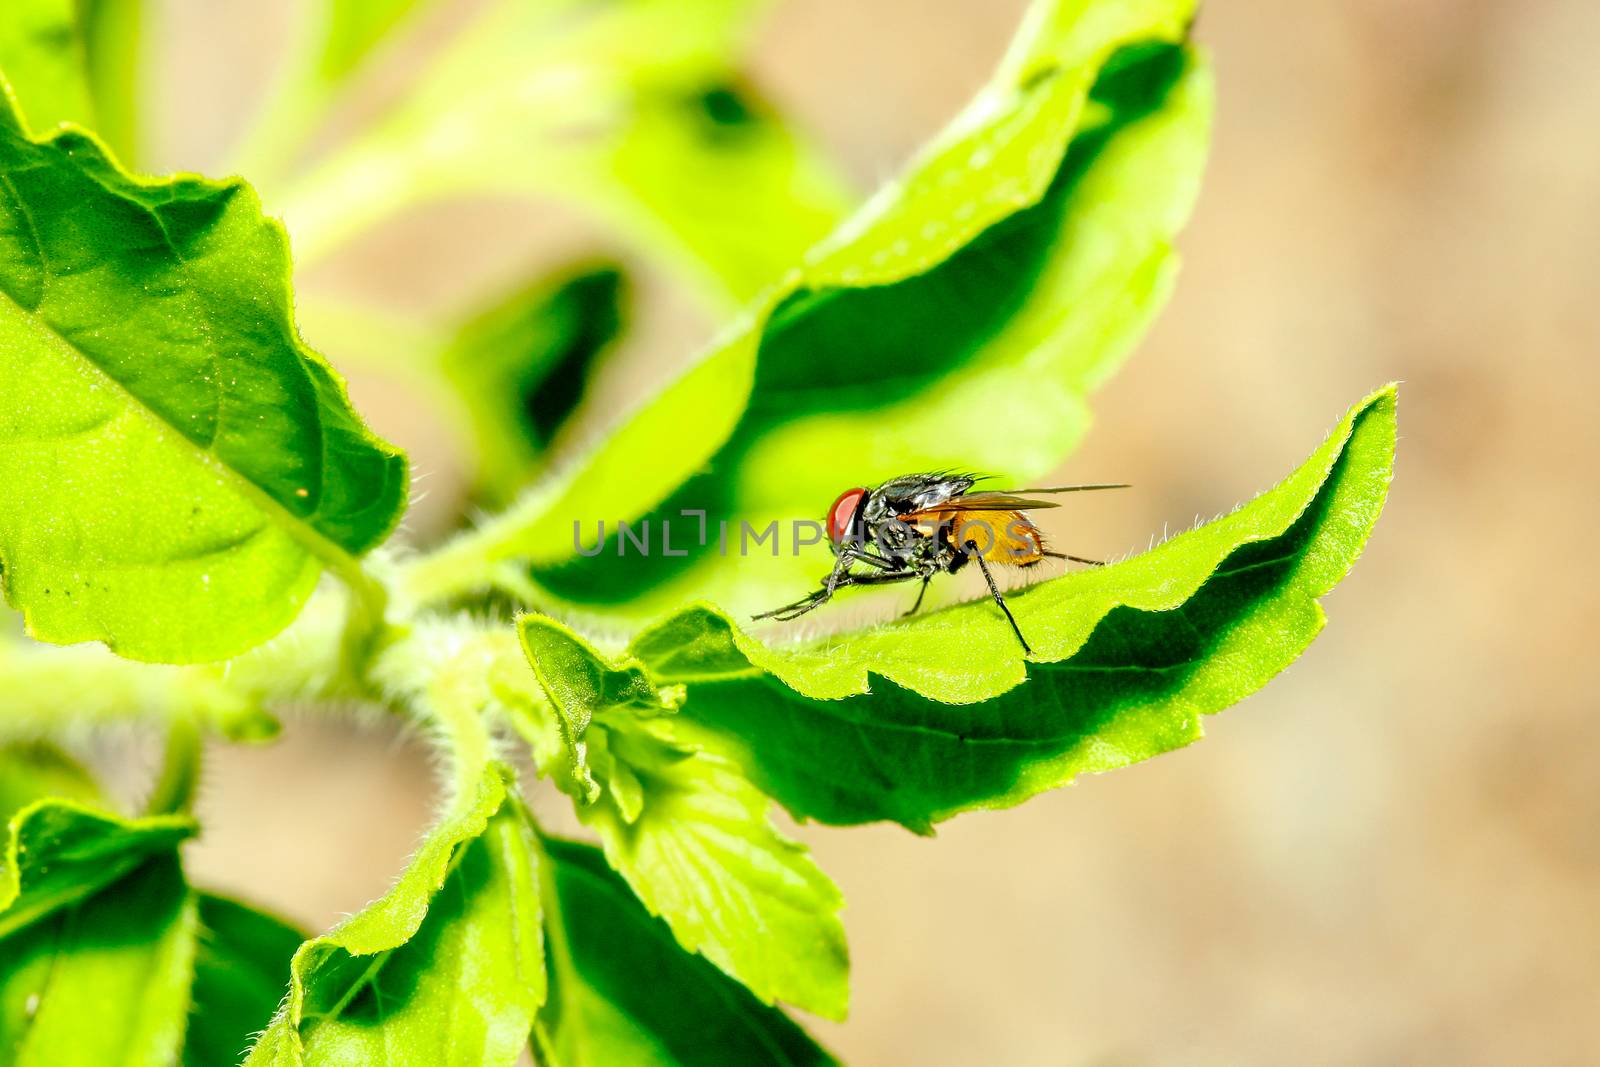 Brown fly on green leaf in garden  at thailand  by pumppump